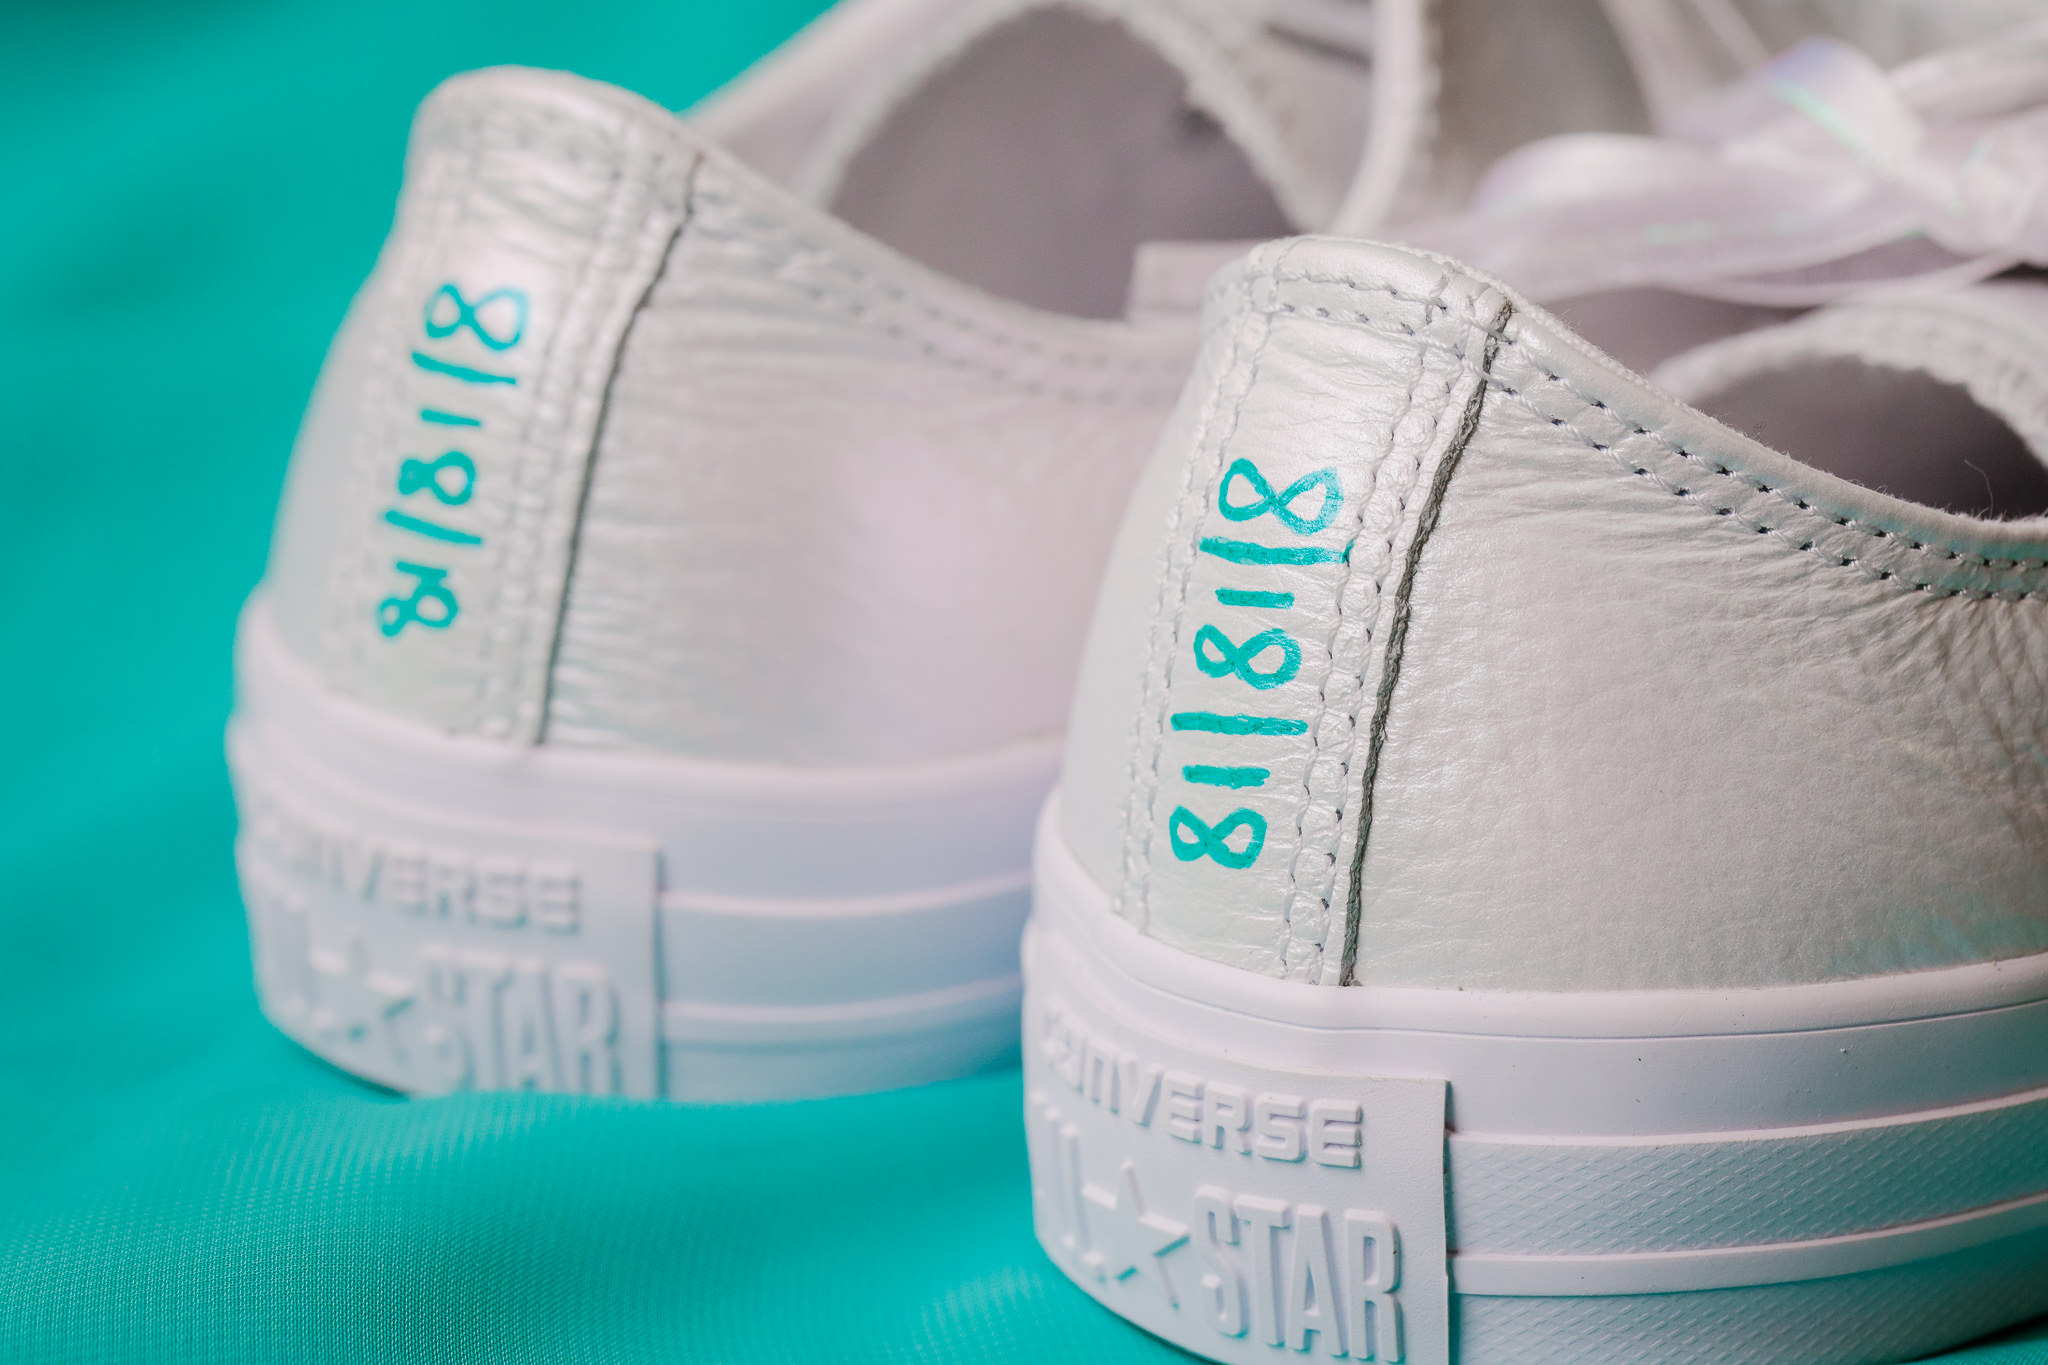 Wedding date written in turquoise Sharpie on the back of the bride's white Converse All Stars